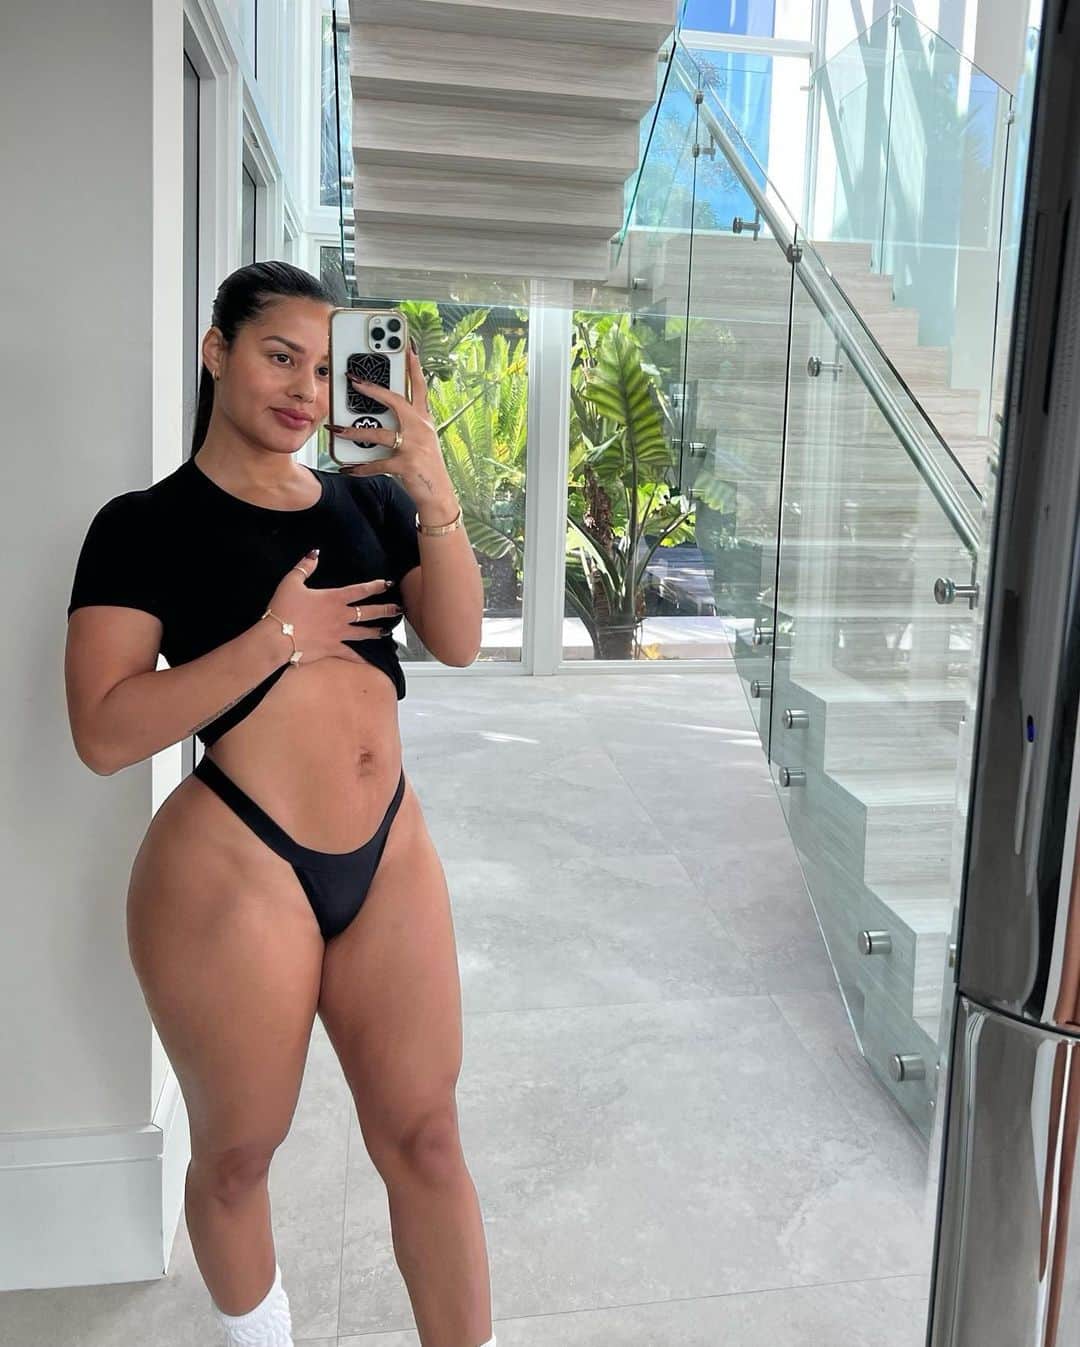 Katya Elise Henryのインスタグラム：「mirror pic cuz it’s been a while ;) 10 months postpartum after baby #2 feeling like HERRRR okay ✨😂 I swear ever since I stopped breastfeeding a few weeks ago my body is slowly understanding the assignment. We’re not in baby making mode anymore, we’re in bad bish mode. Everything is just coming back together nicely and I’m honestly so grateful 🙏🏽 hormones are so real. But some things I’ve been doing differently lately… 1) cut out gluten and dairy, guys the changes I’ve seen are 🤌🏽 2) added the stair stepper to my routine 3) starting taking ehplabs oxyshred before workouts *only a few times a week* which is a fat burner… (use code katya10 to save $) my fav flavor is raspberry kisses and I mix it with bubbly soda water and.. omg. you’re welcome. 4) caloric deficit now that I don’t breastfeed 5) following my @wbkfit programs bc duh! ps- programs are on sale rn for Black Friday 💅🏽 6) being patient with myself and dancing nakey in the mirror for self care purposes!!!!! highly recommend.」